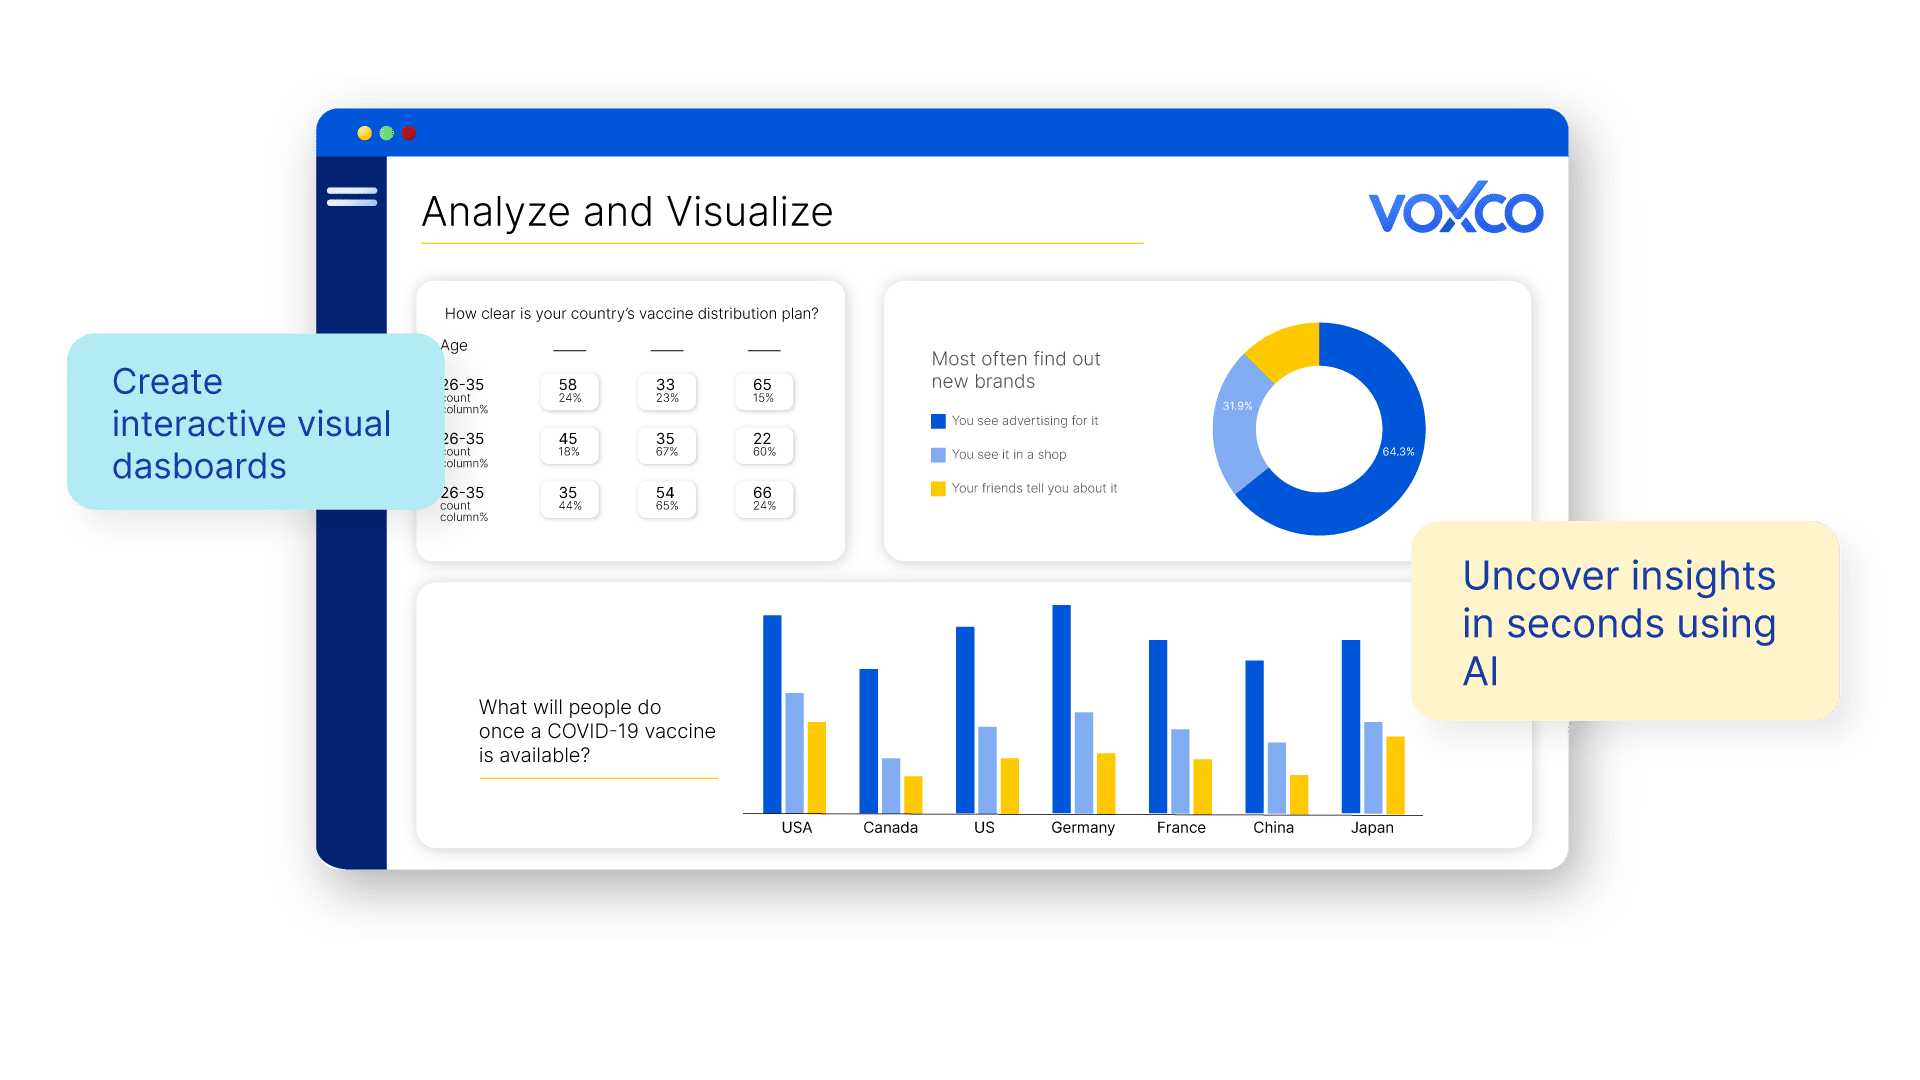 voxco audience images4 1